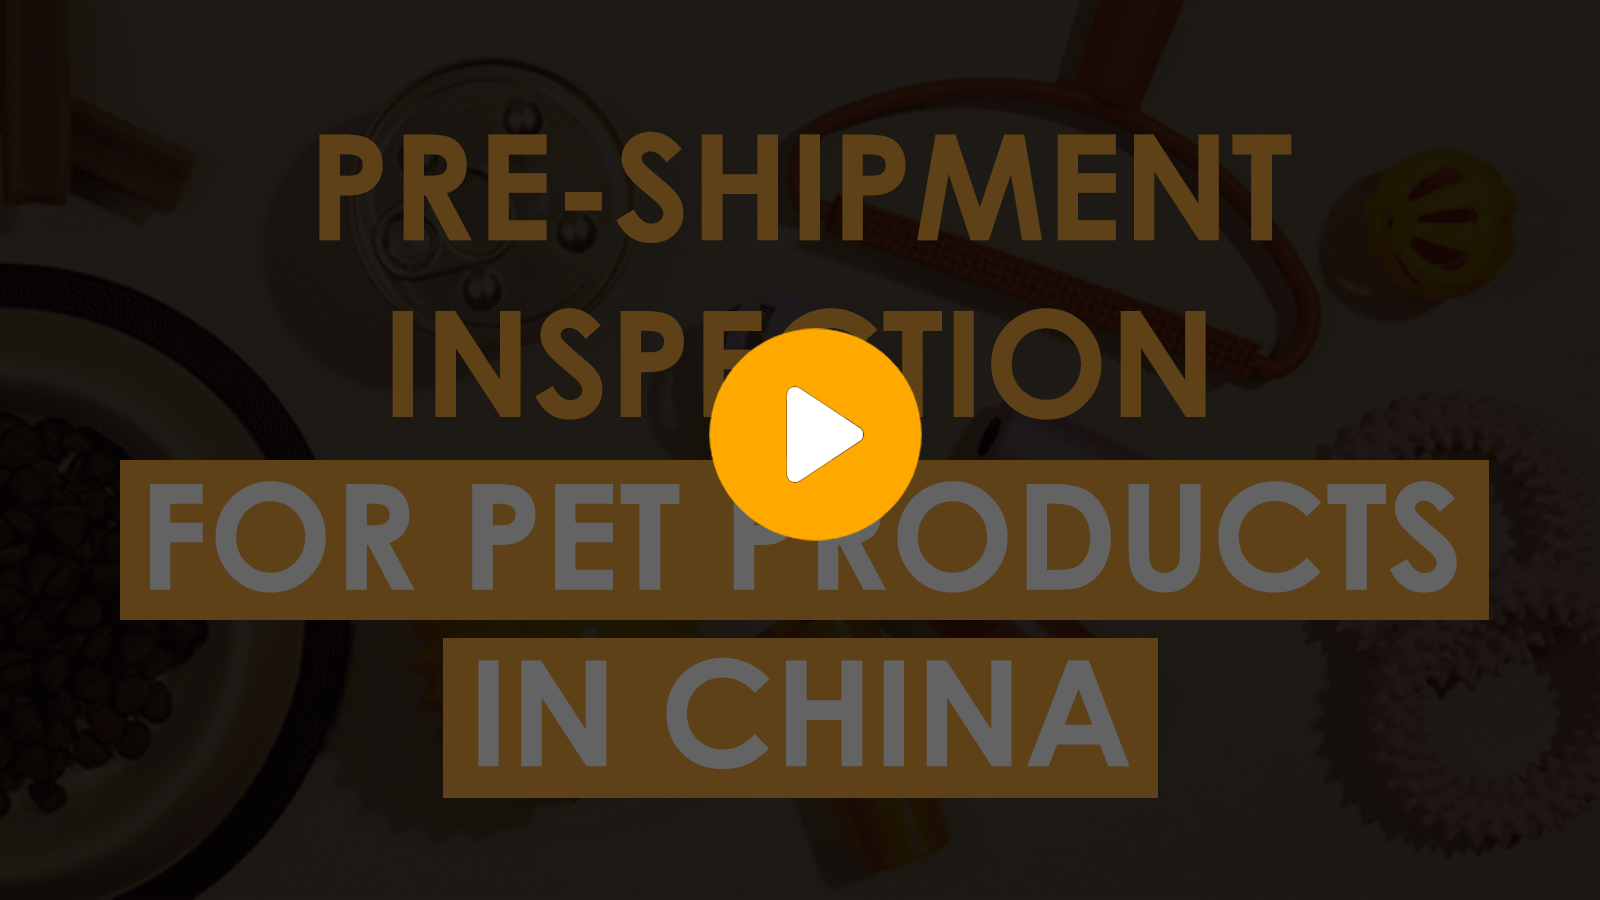 pre-shipment inspection for pet products in china